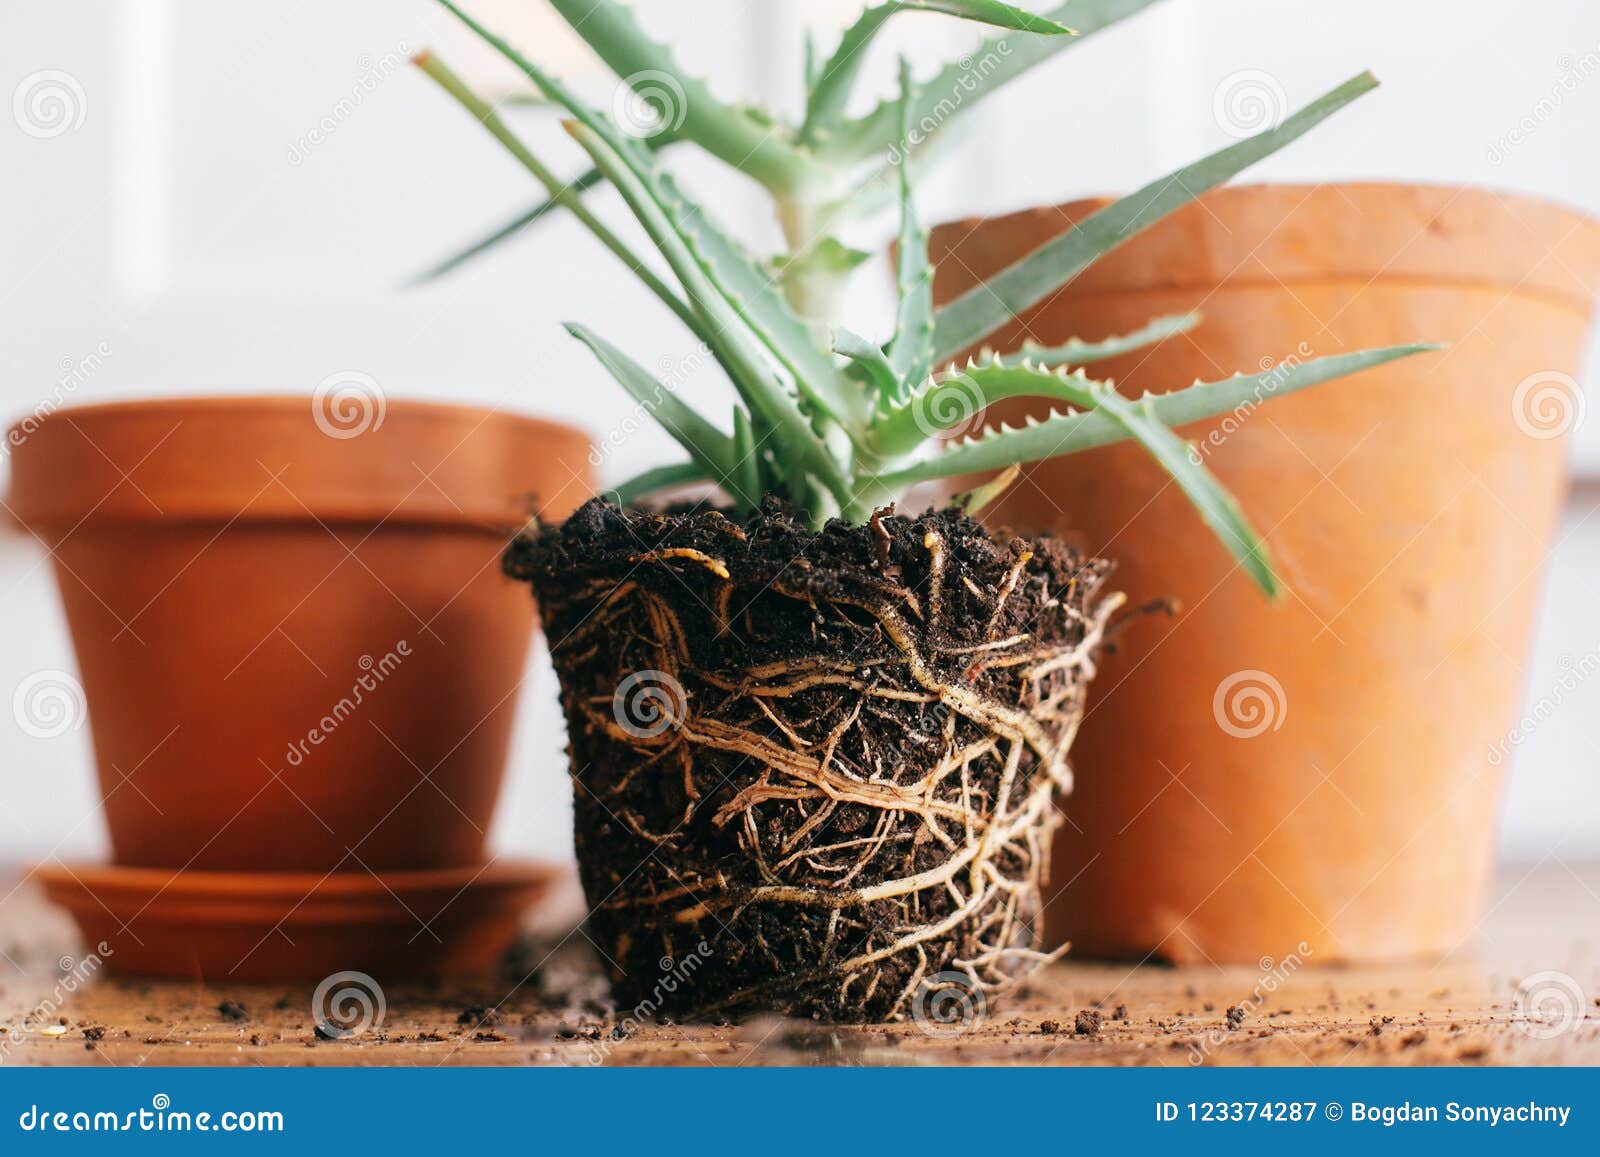 Aloe Vera With Roots In Ground Repot To Bigger Clay Pot Indoors